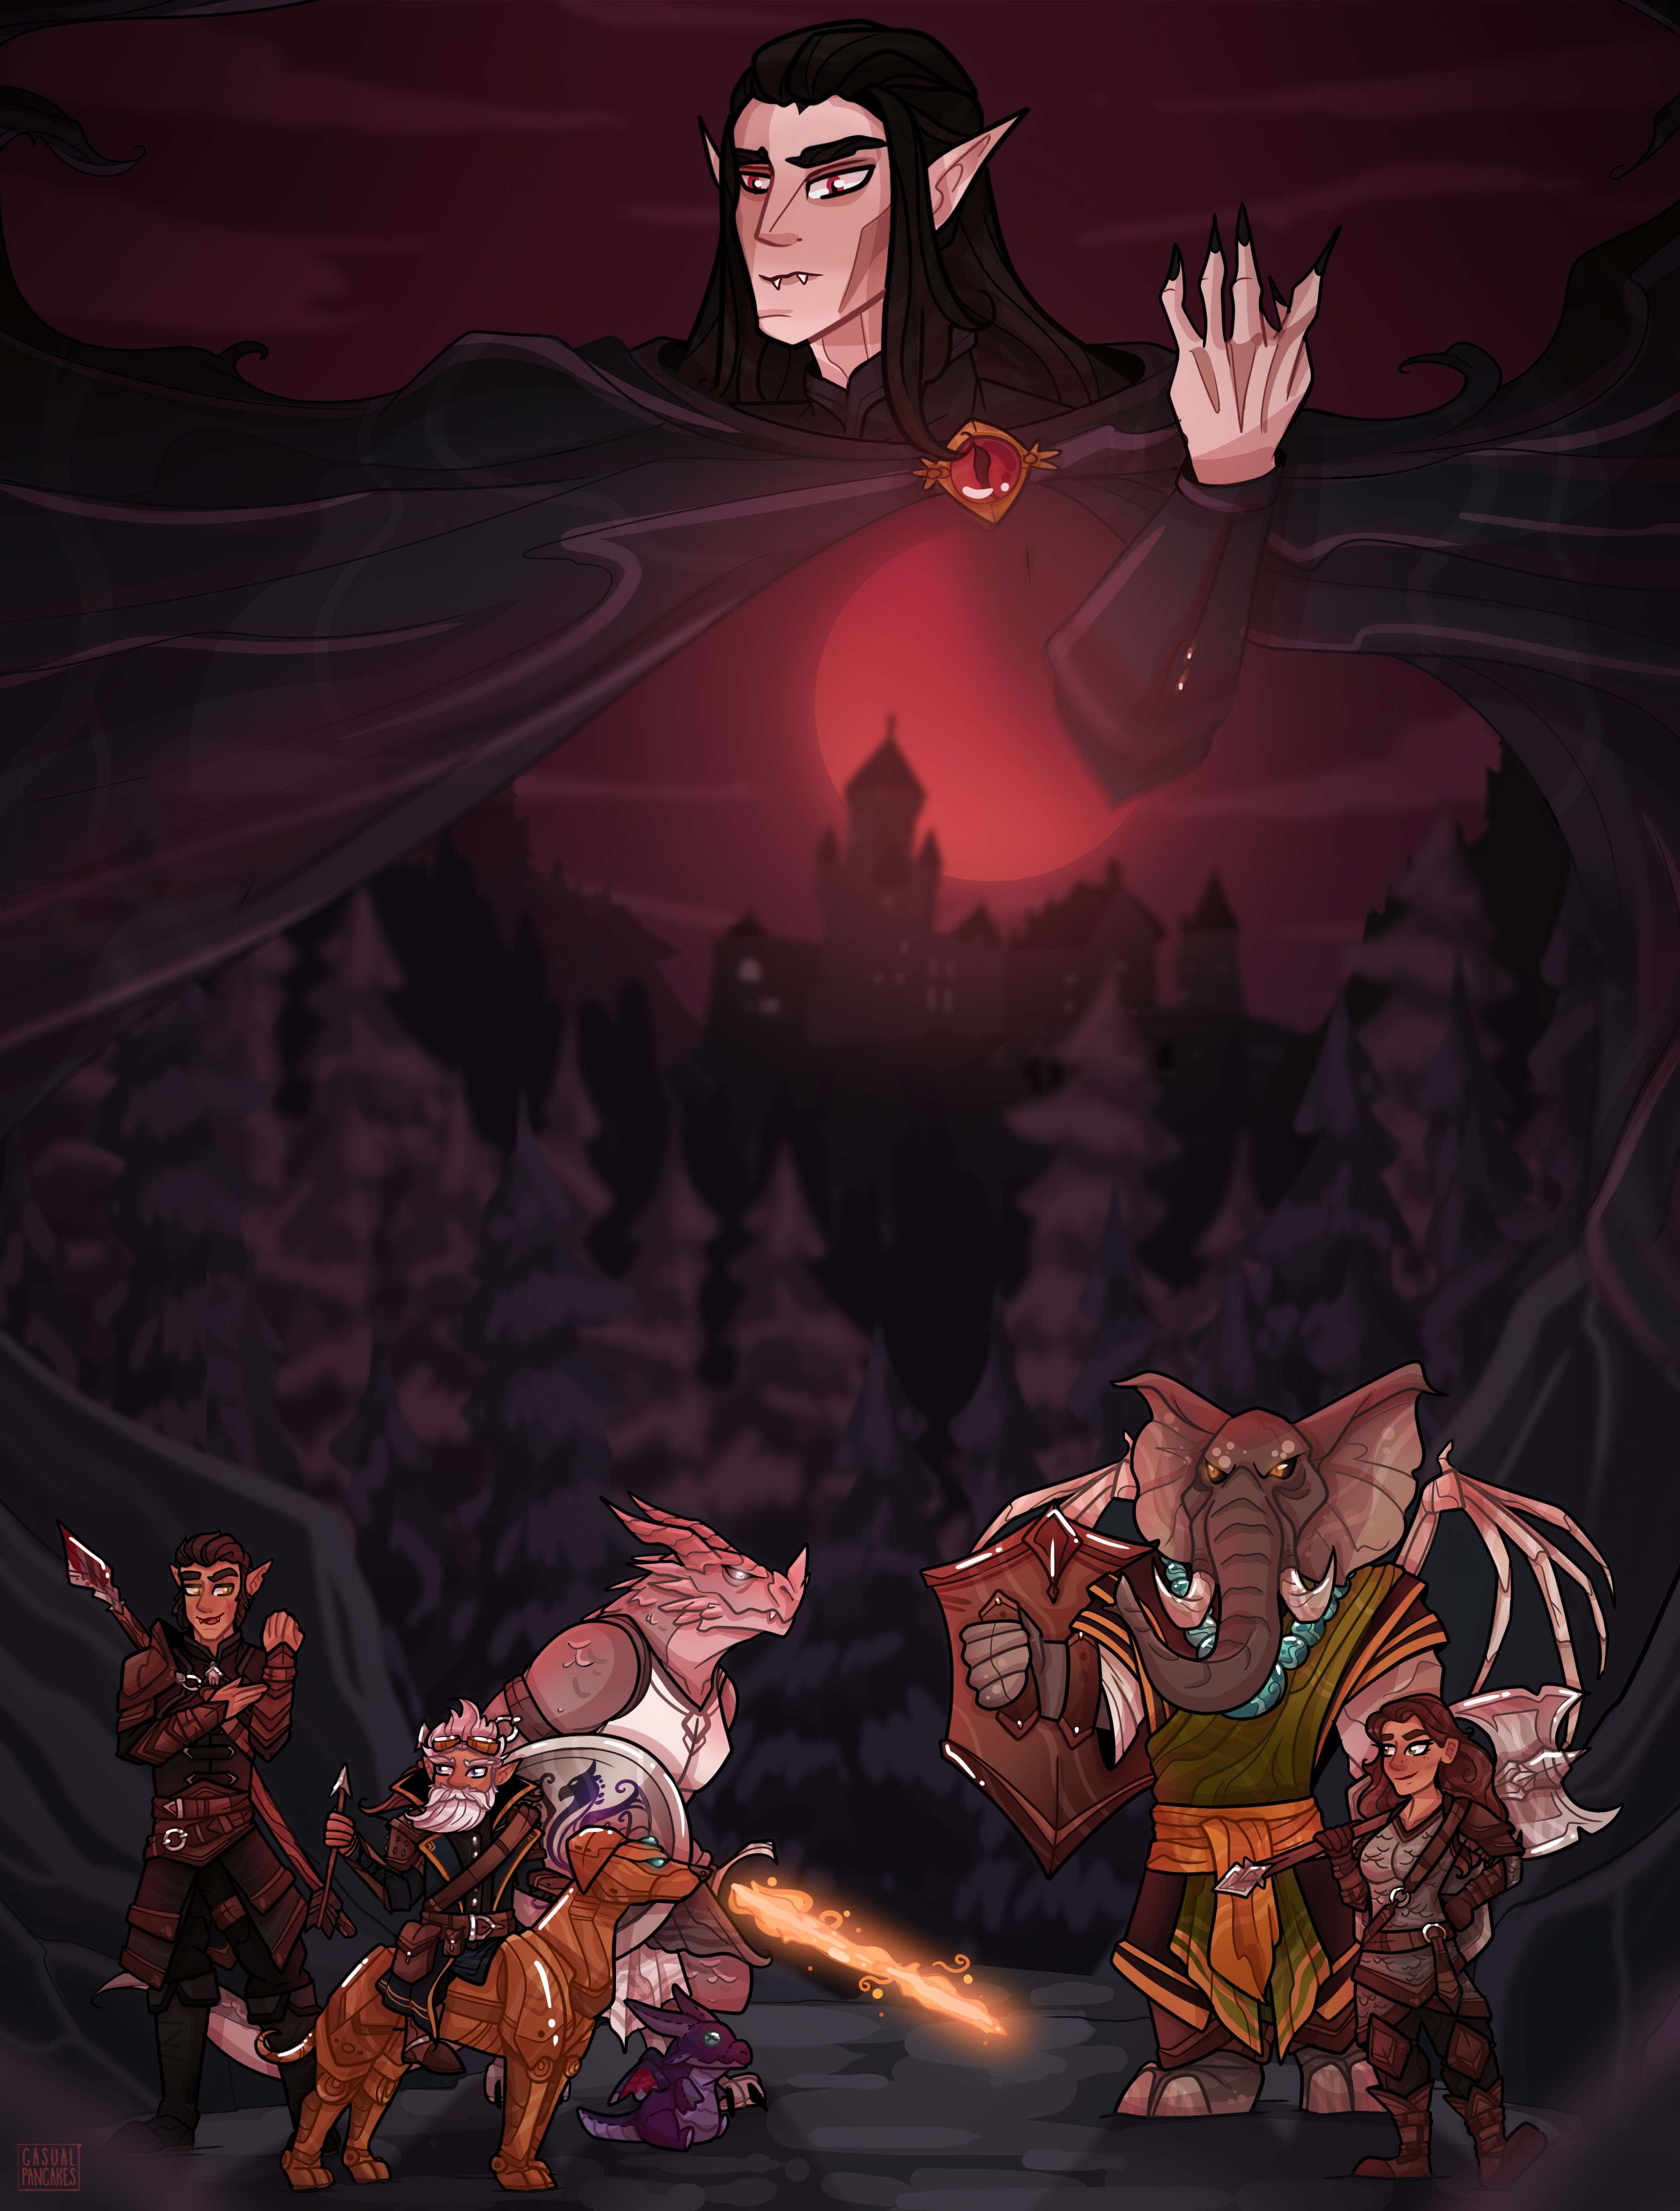 A dnd party under the blood moon of Strahd